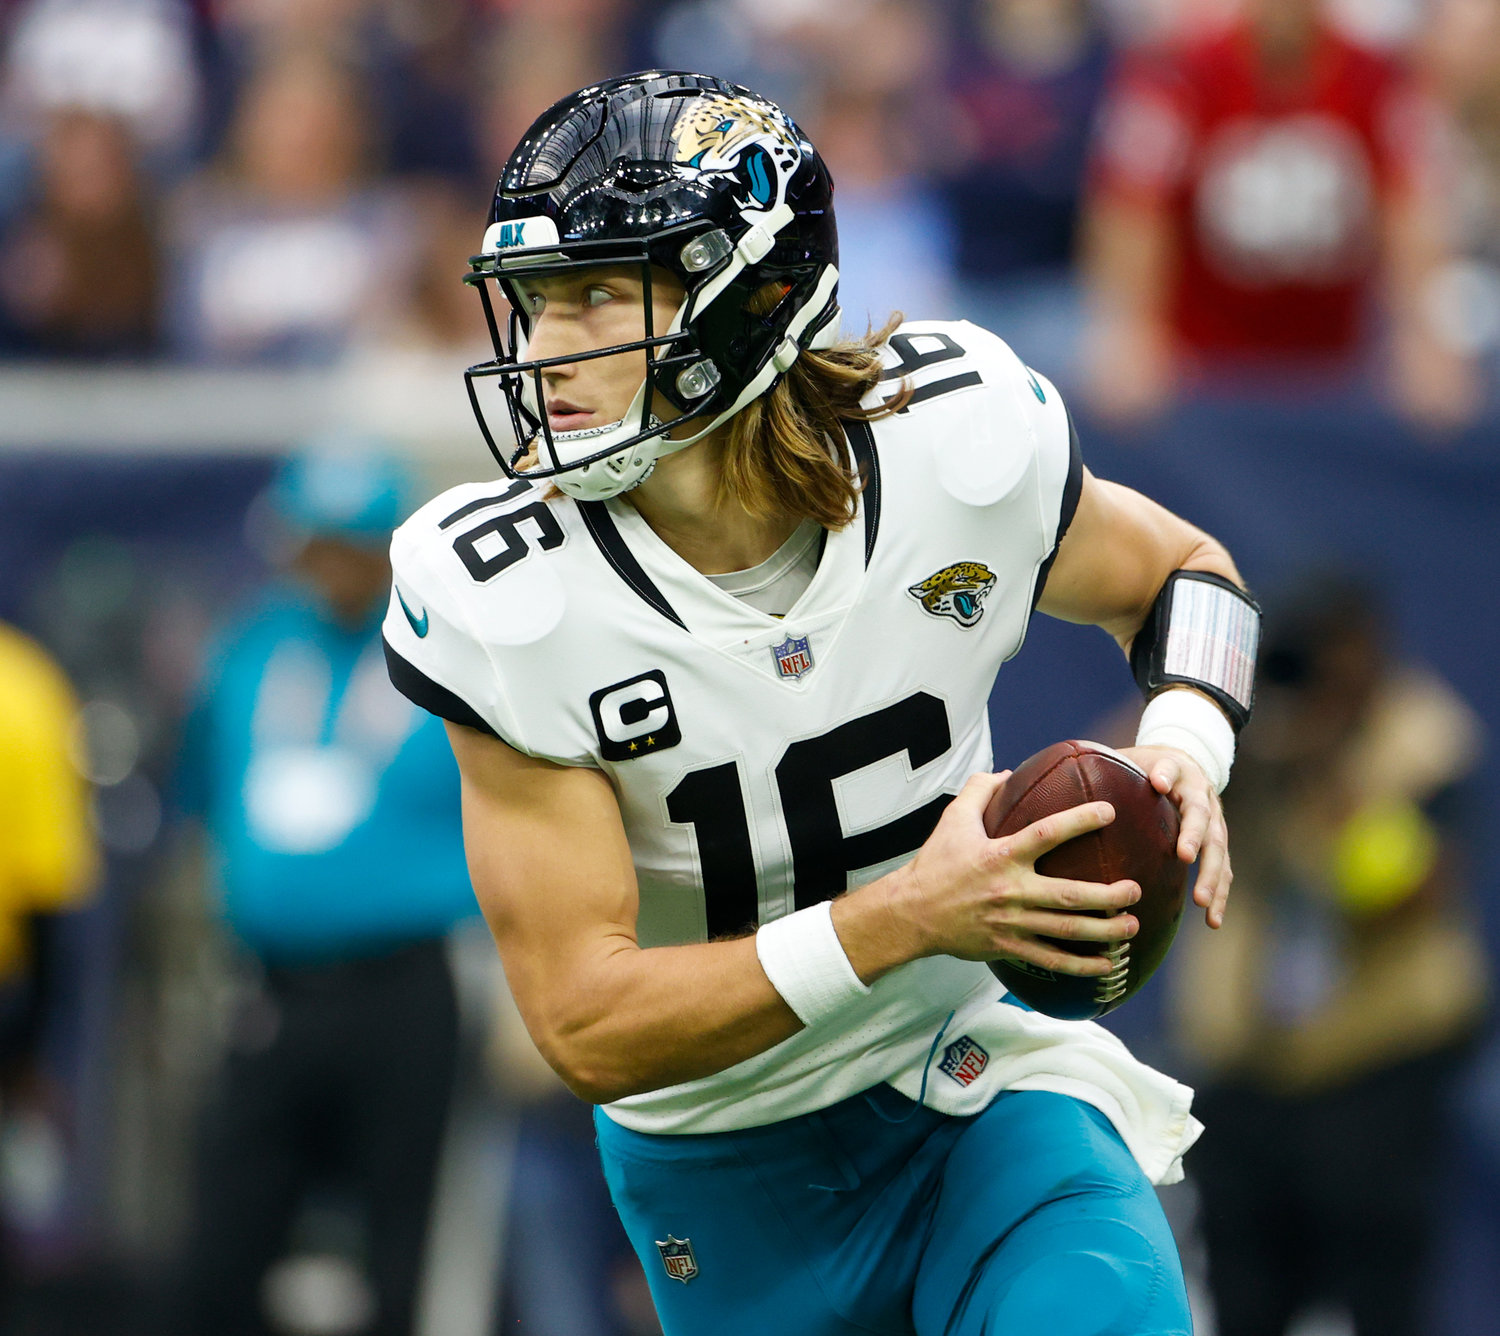 Jaguars quarterback Trevor Lawrence (16) rolls out looking to pass during an NFL game between the Houston Texans and the Jacksonville Jaguars on Jan. 1, 2023 in Houston. The Jaguars won, 31-3.